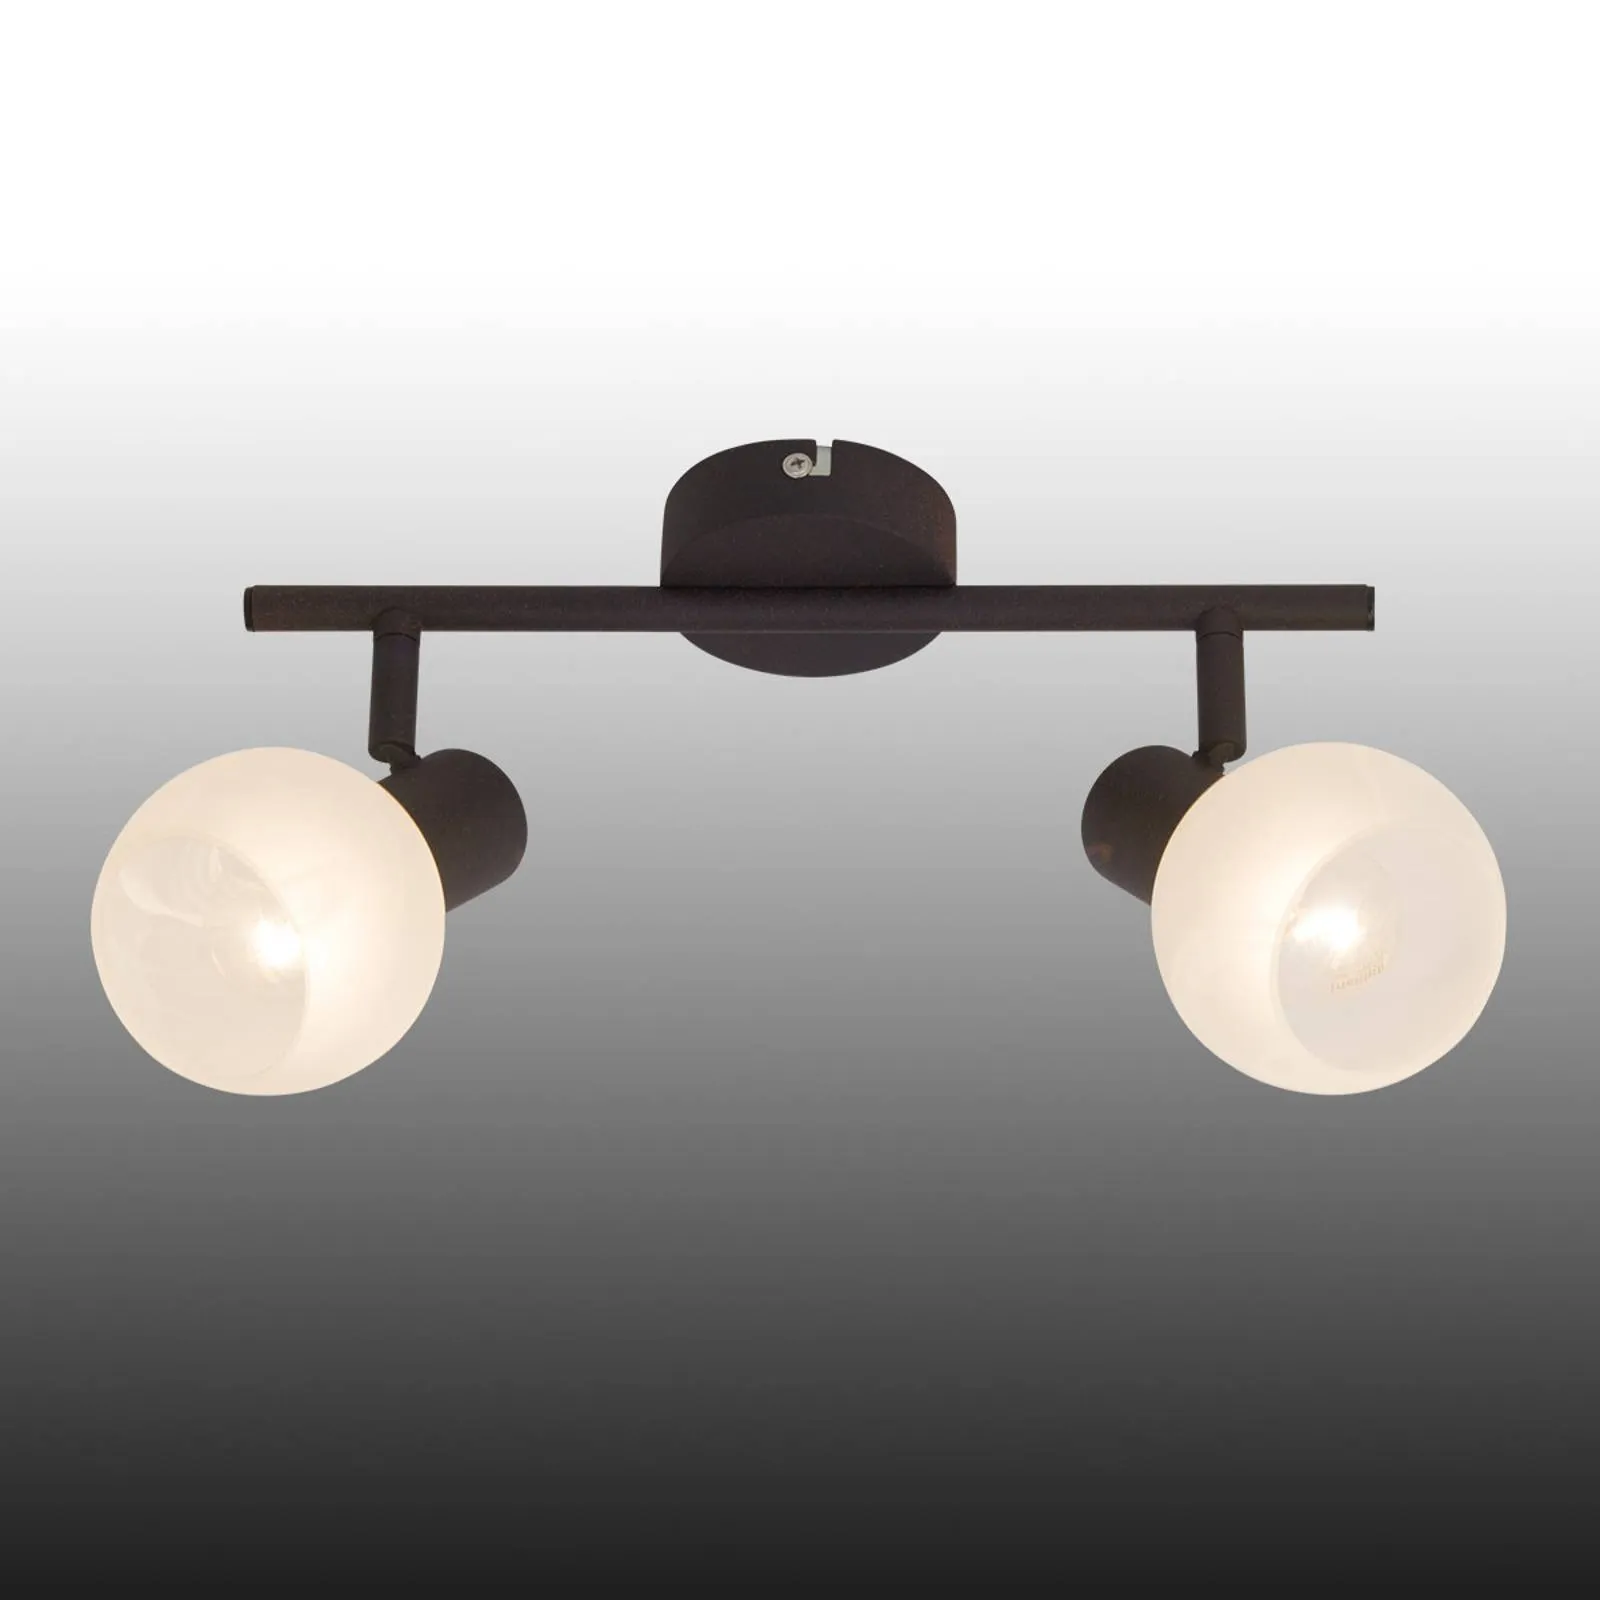 Ceiling light Gabon in brown and white, two-bulb